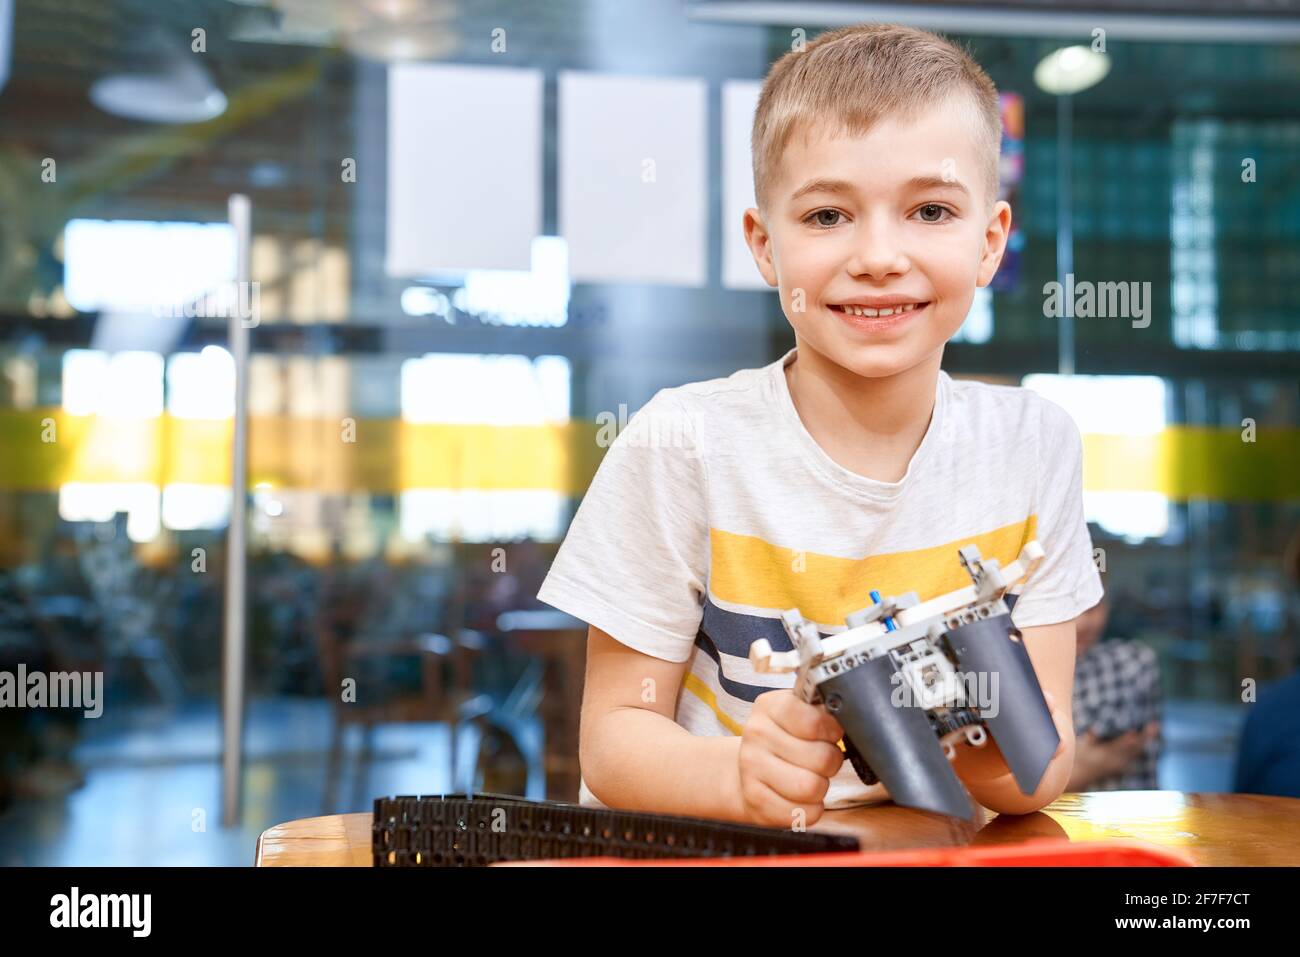 Front view of lovely caucasian boy smiling and looking at camera. Building kit for kids on table, children creating toys, having positive emotions and joy. Close up of boy working on project. Stock Photo